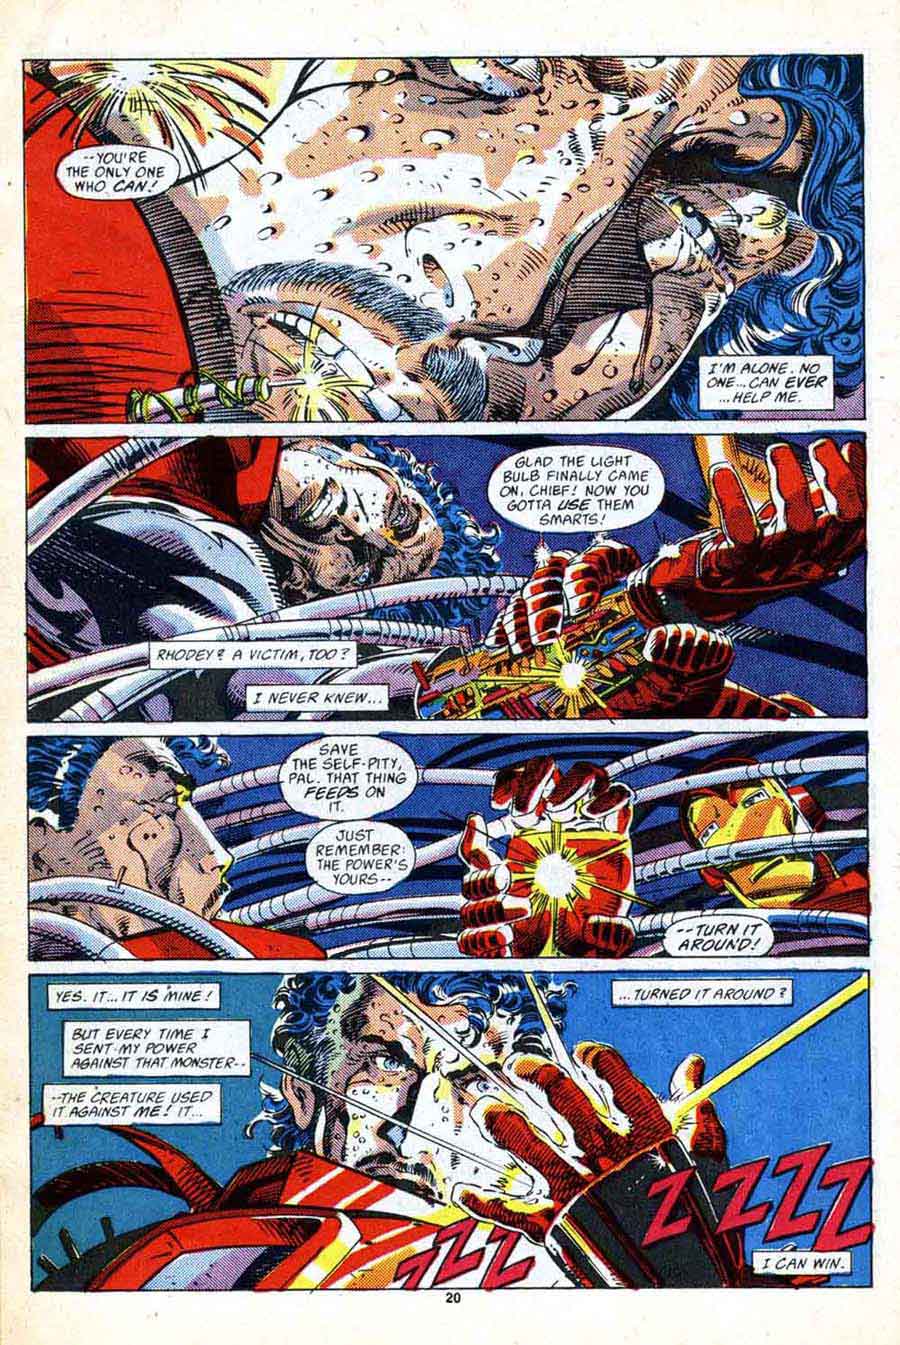 Iron Man v1 #232 marvel comic book page art by Barry Windsor Smith